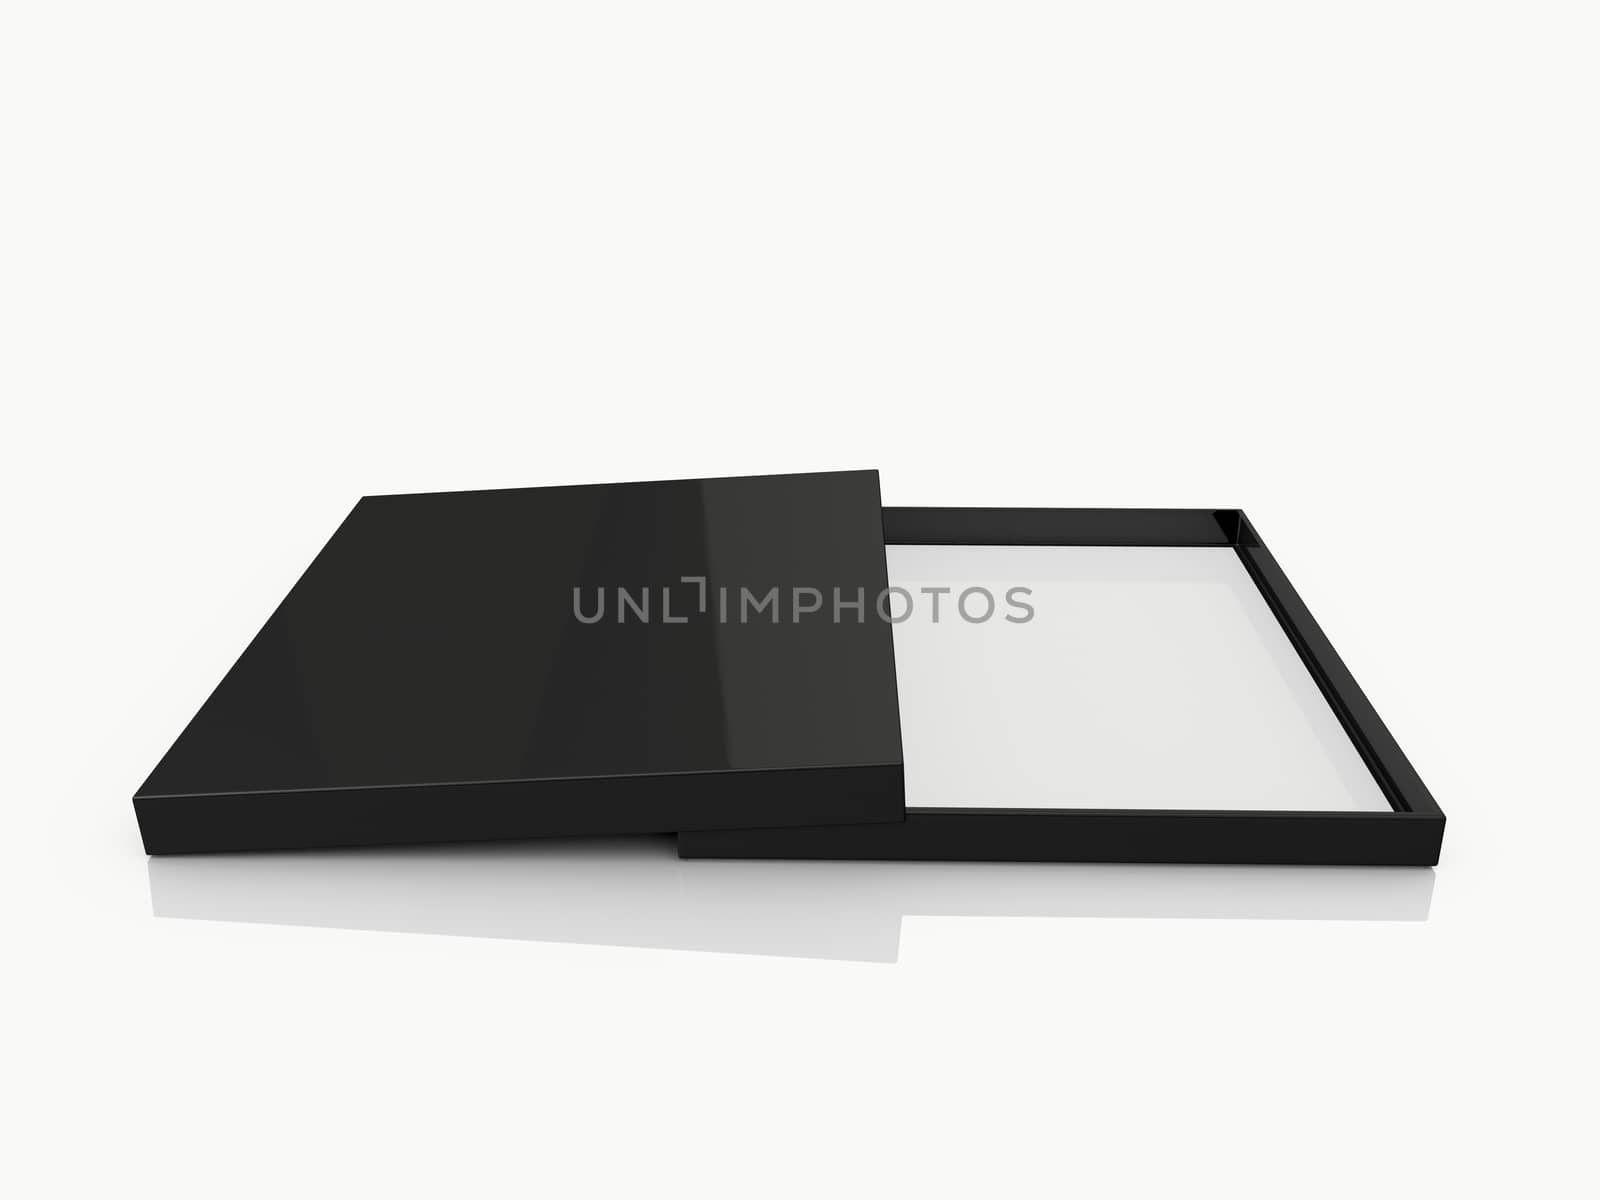 Black elegant empty open box with reflection, side view, isolated on white background.